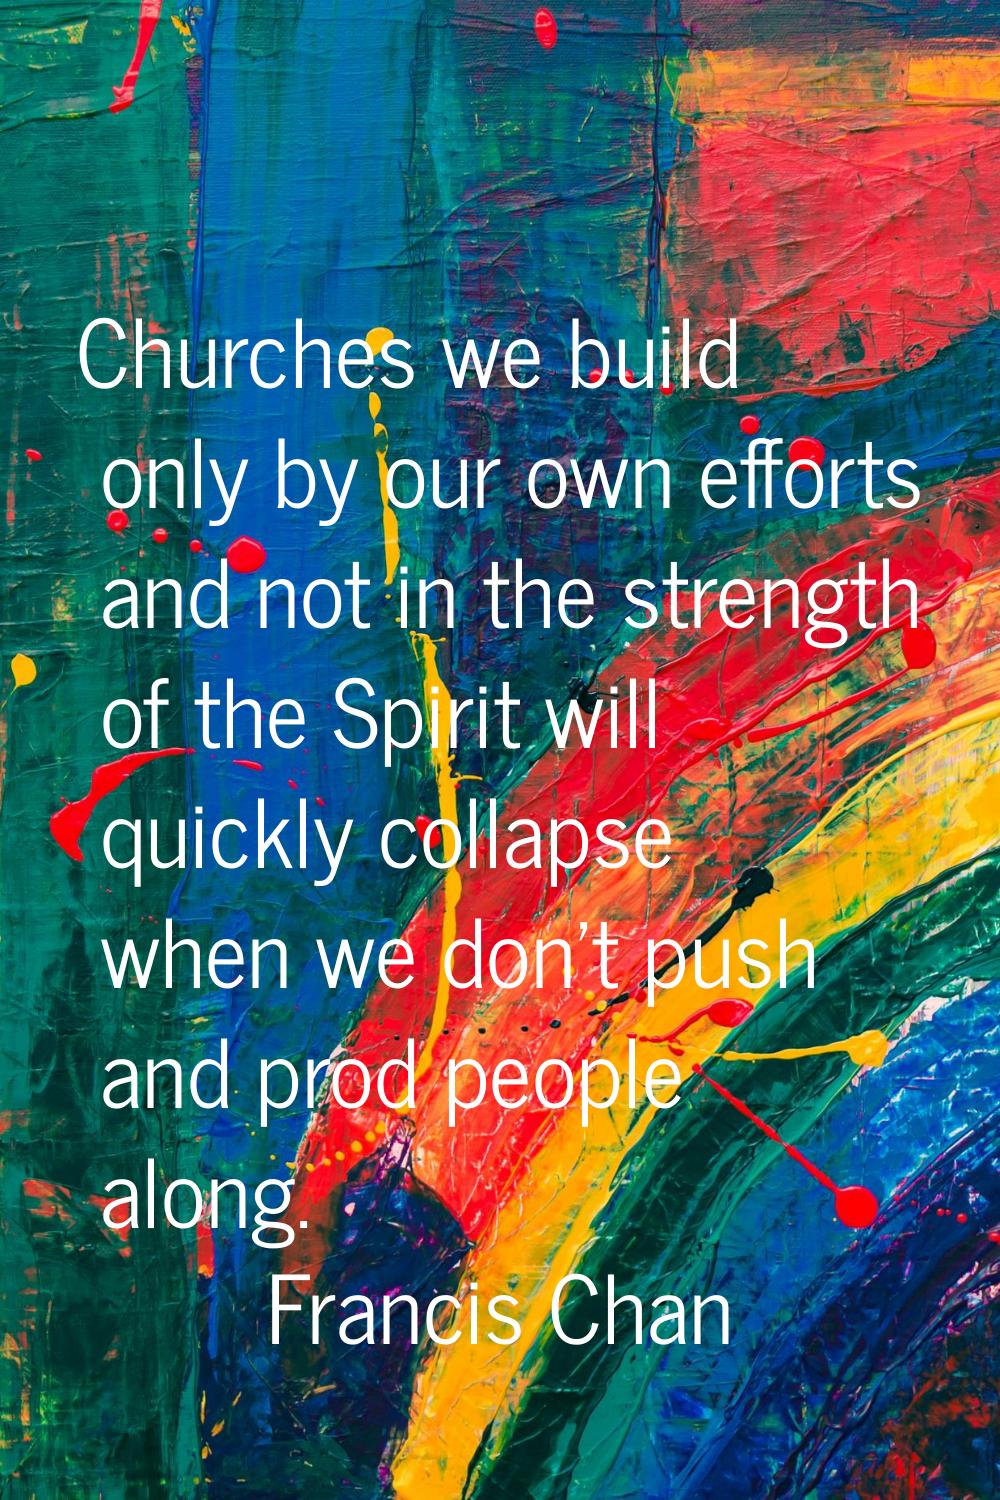 Churches we build only by our own efforts and not in the strength of the Spirit will quickly collap